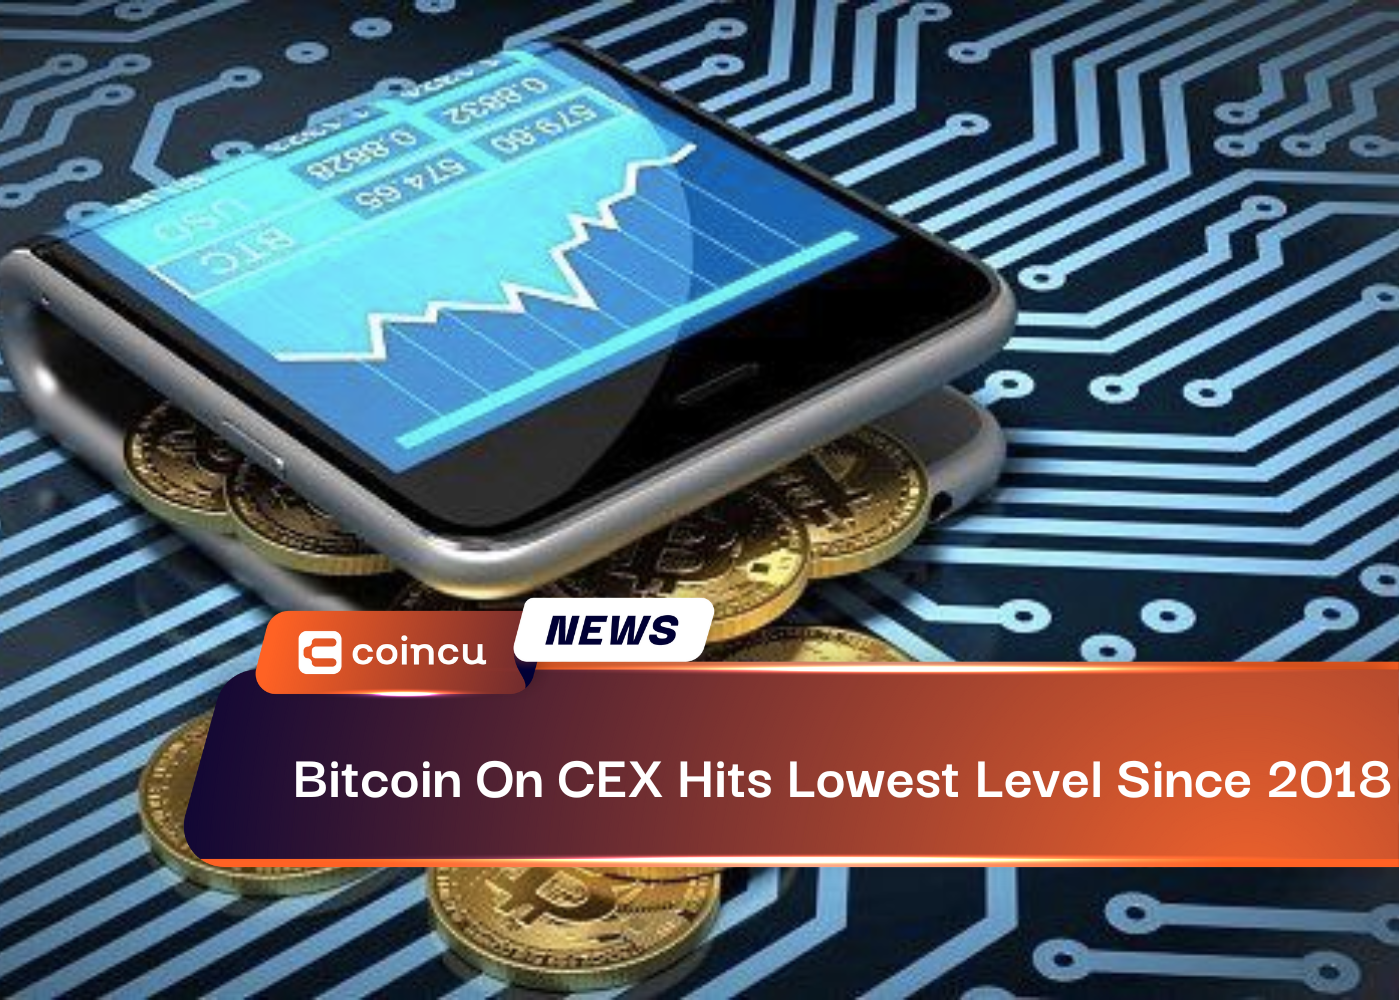 Bitcoin On CEX Hits Lowest Level Since 2018